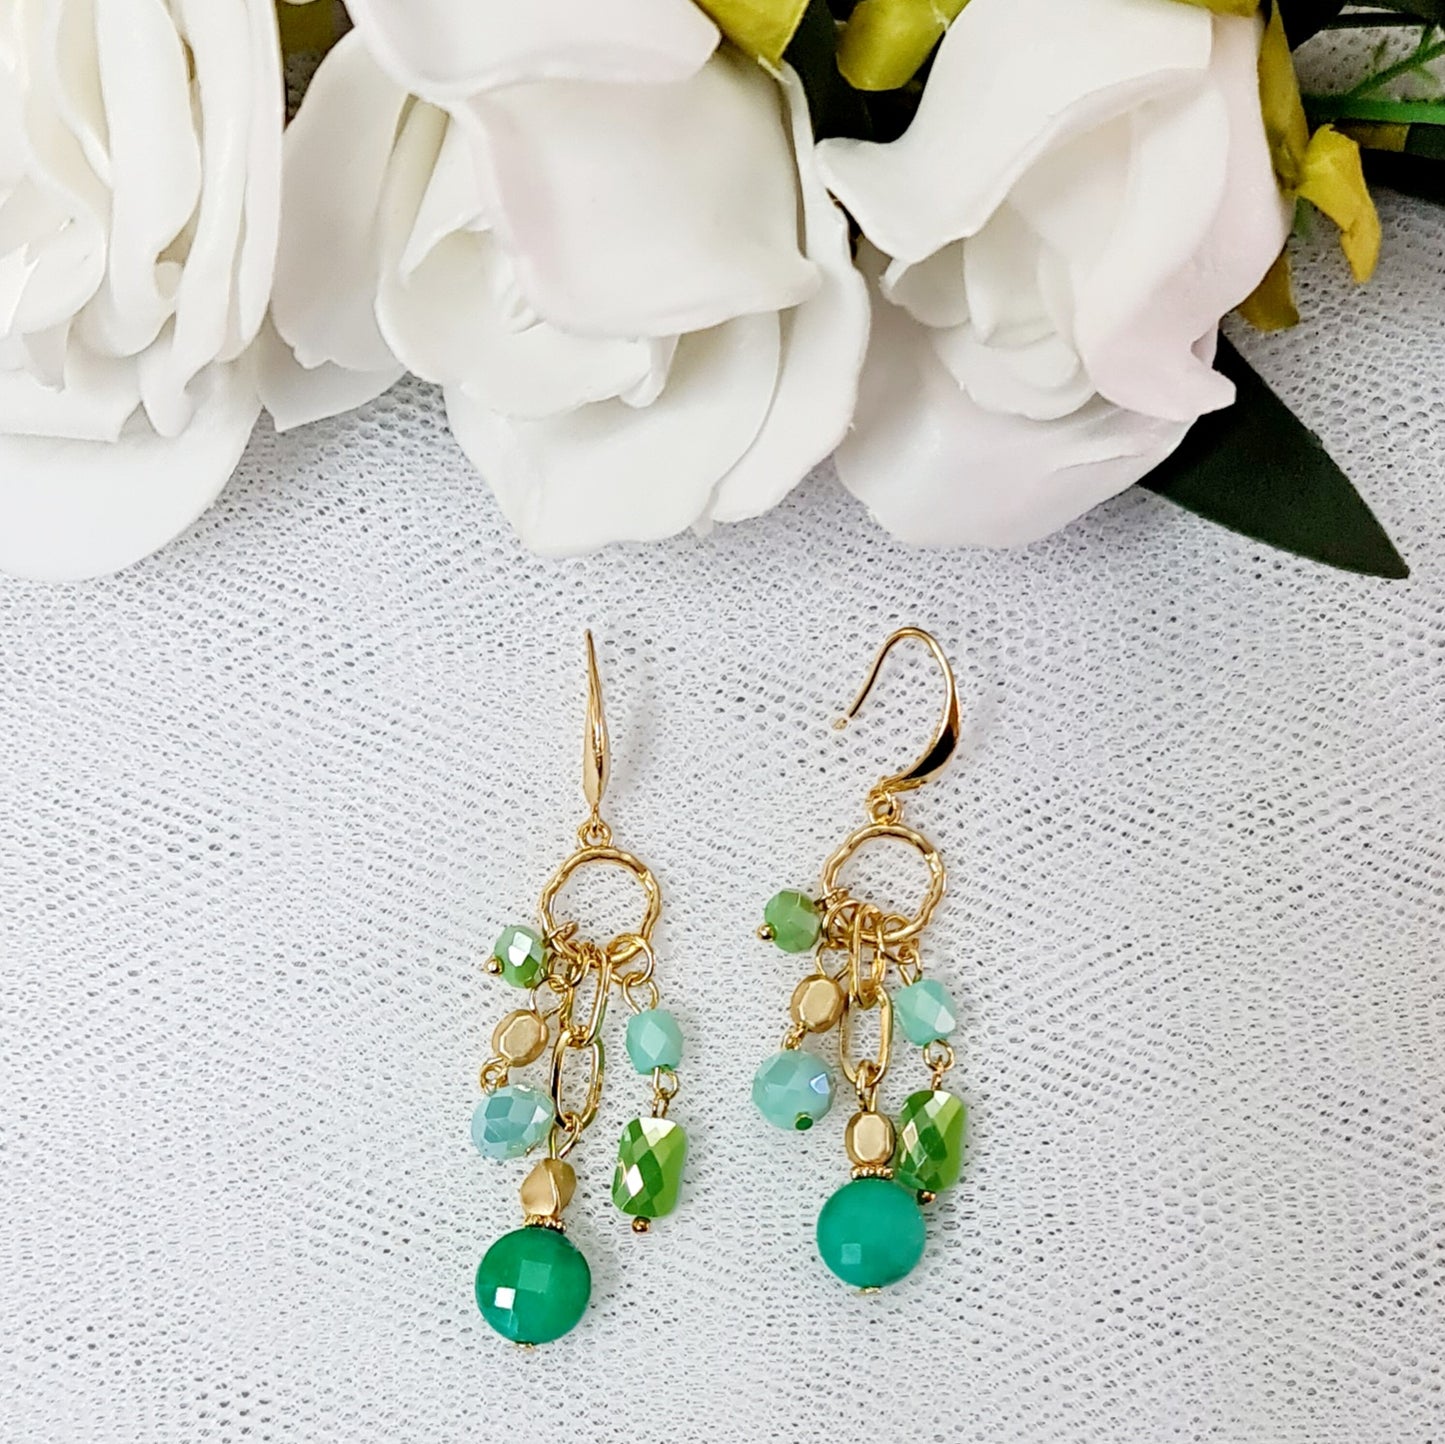 Embellished Drop Earrings - Gold and Green